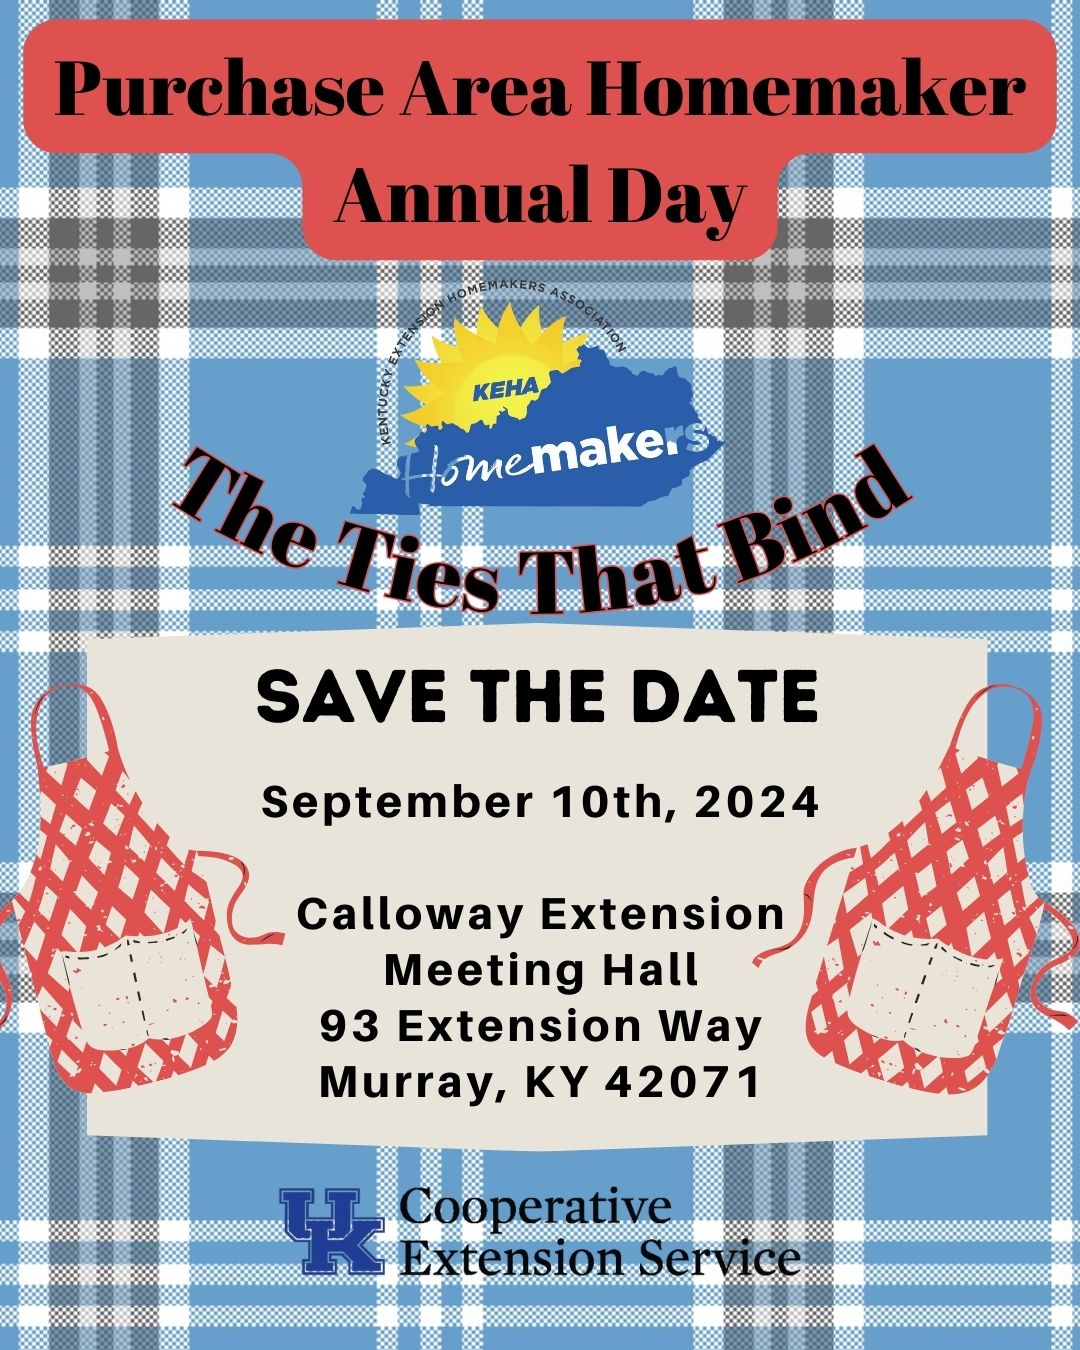 Homemaker Annual Day Save the Date 2024